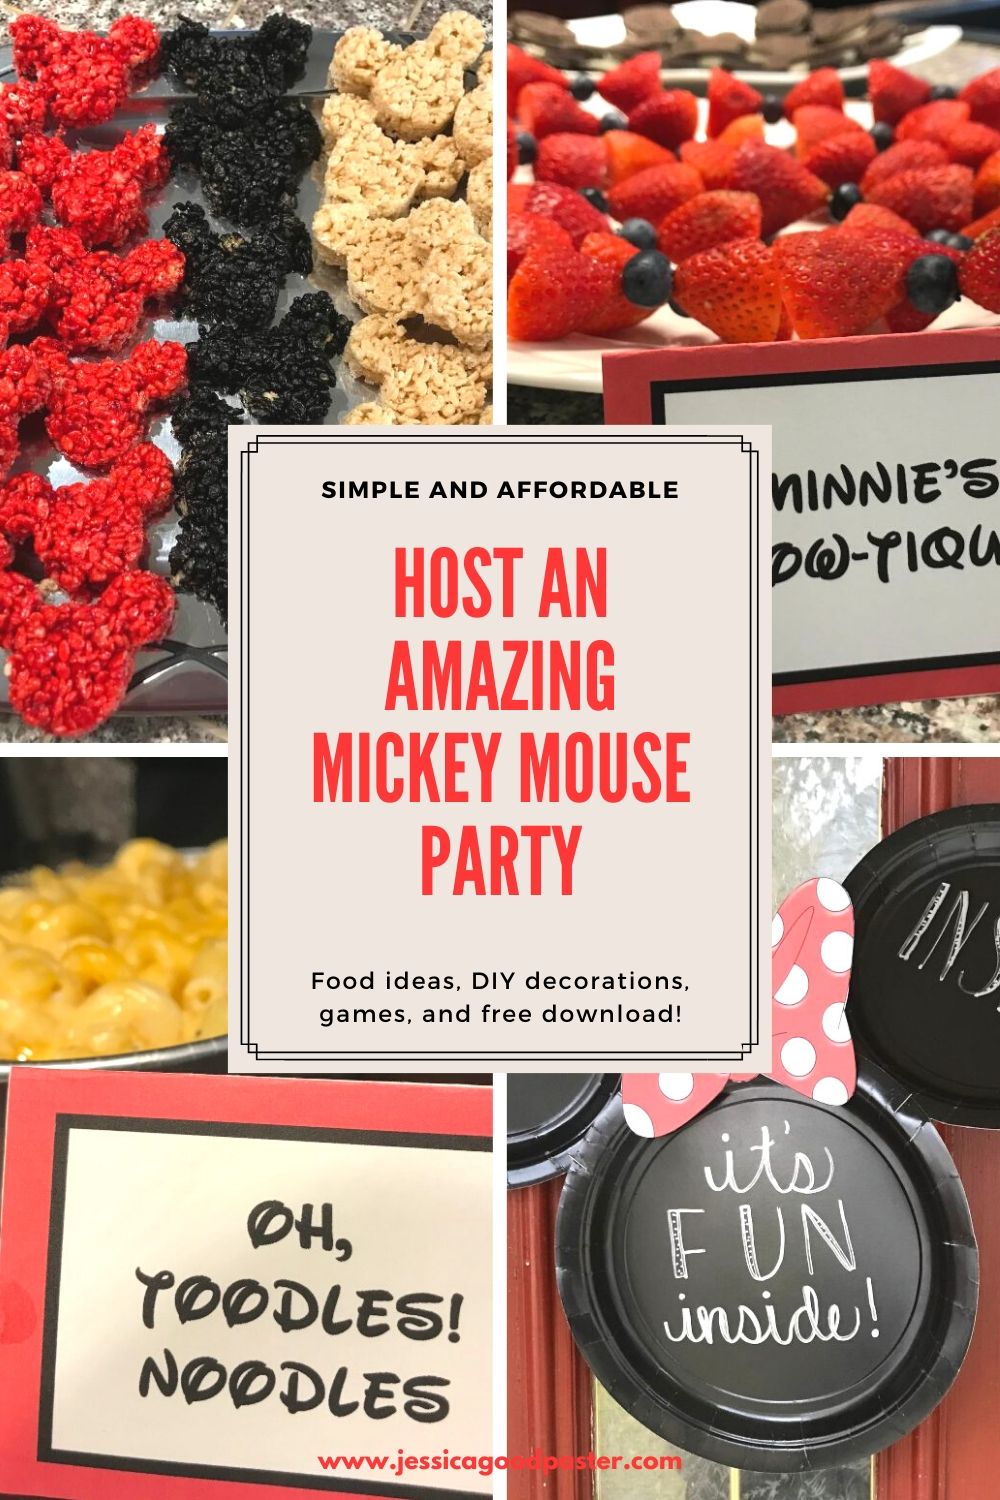 How to Host an Amazing Mickey Mouse Party on a Budget | Tons of affordable options for Mickey or Minnie parties including food ideas, decorations, outfits, games, party supplies, and free printables! Your Mickey Mouse Clubhouse fan will have a great birthday ! #mickeyparty #mickeymouse #mickeymouseparty #minnieparty #birthday #mickeymouseclubhouse #mickeyprintables